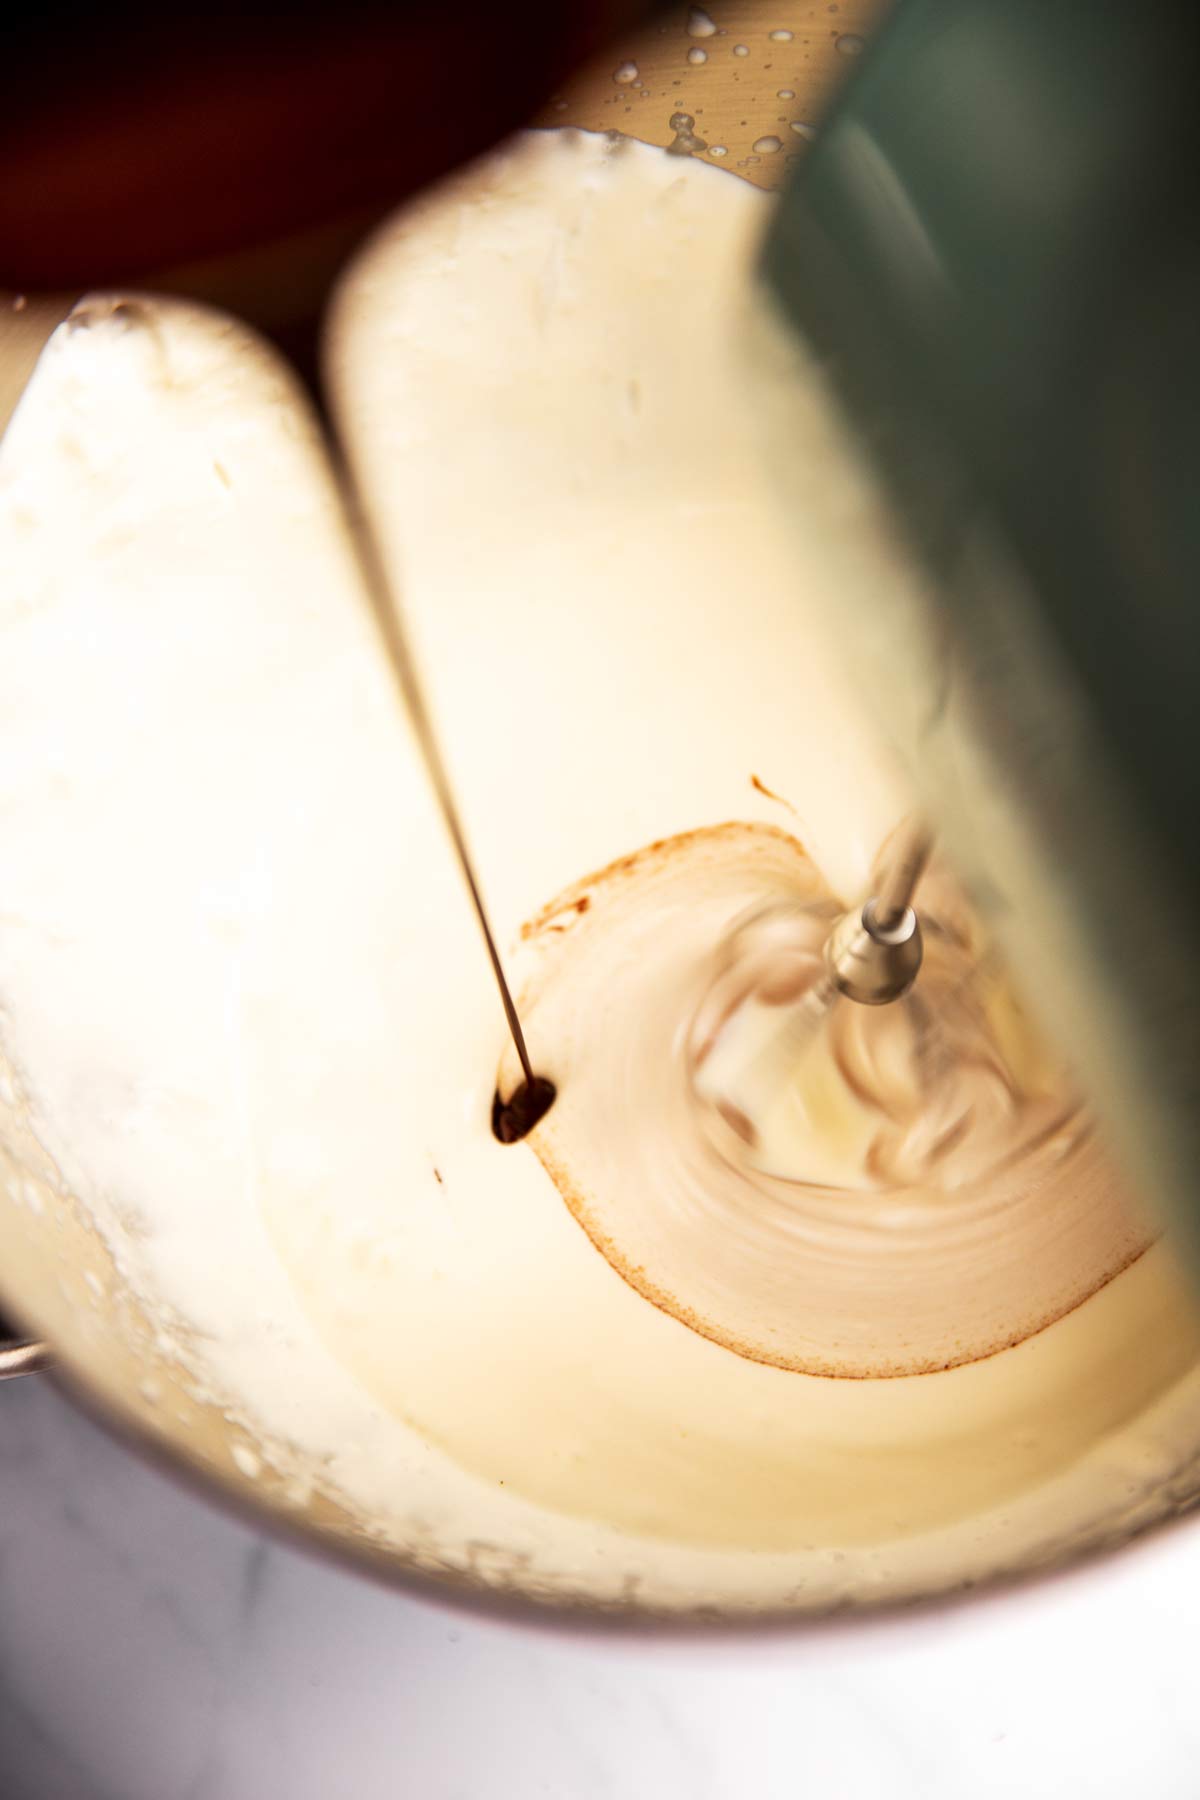 melted chocolate drizzling into whipping cream